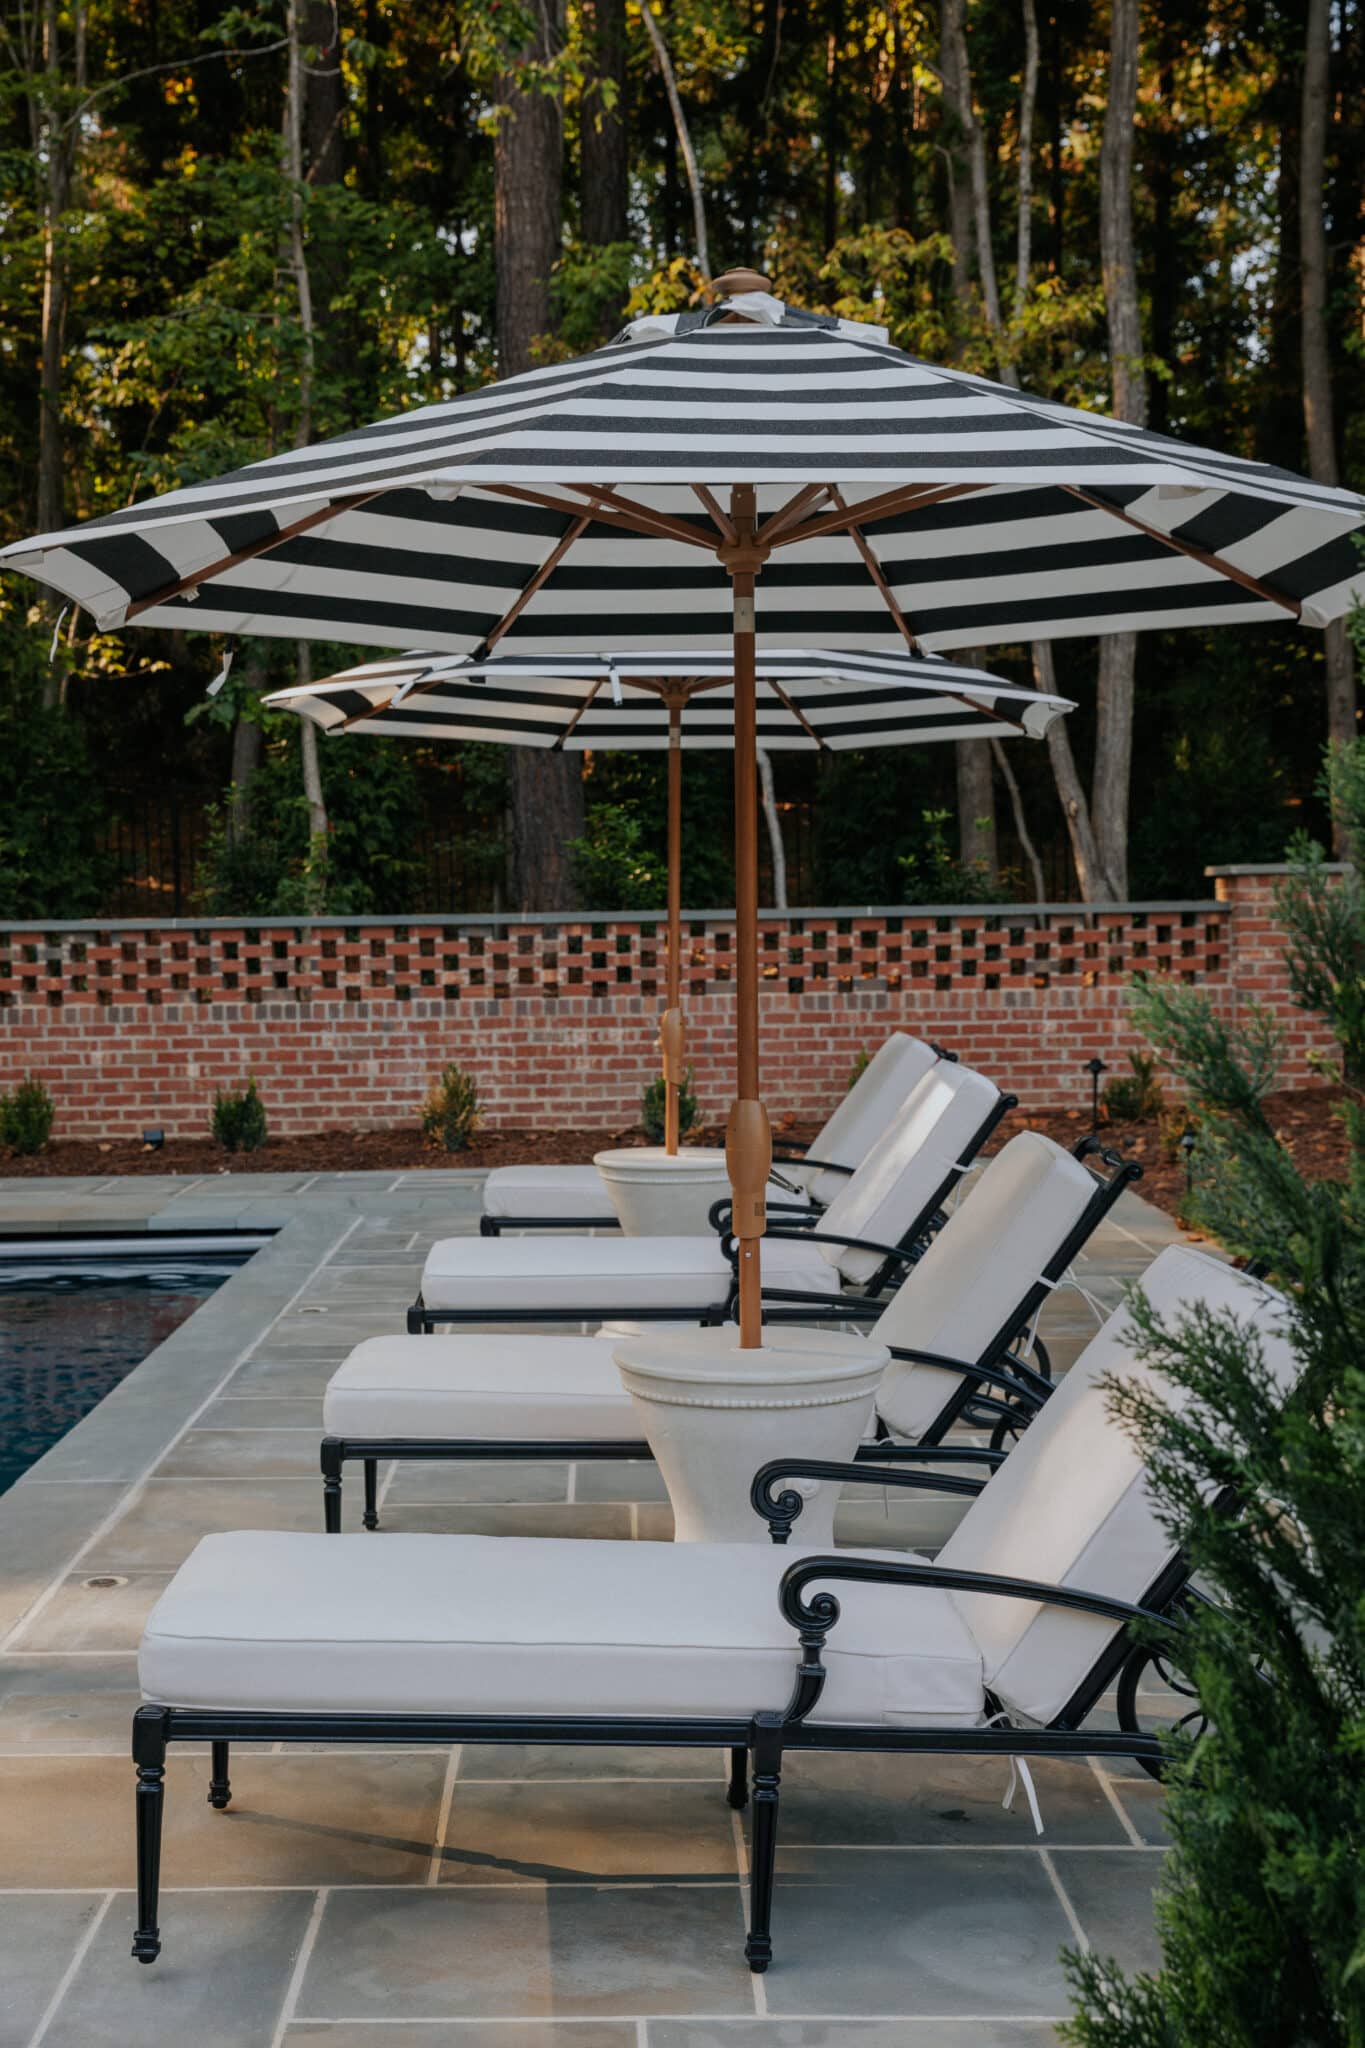 Chris Loves Julia | In-ground pool surrounded by black iron furniture with white cushions under black and white striped umbrellas